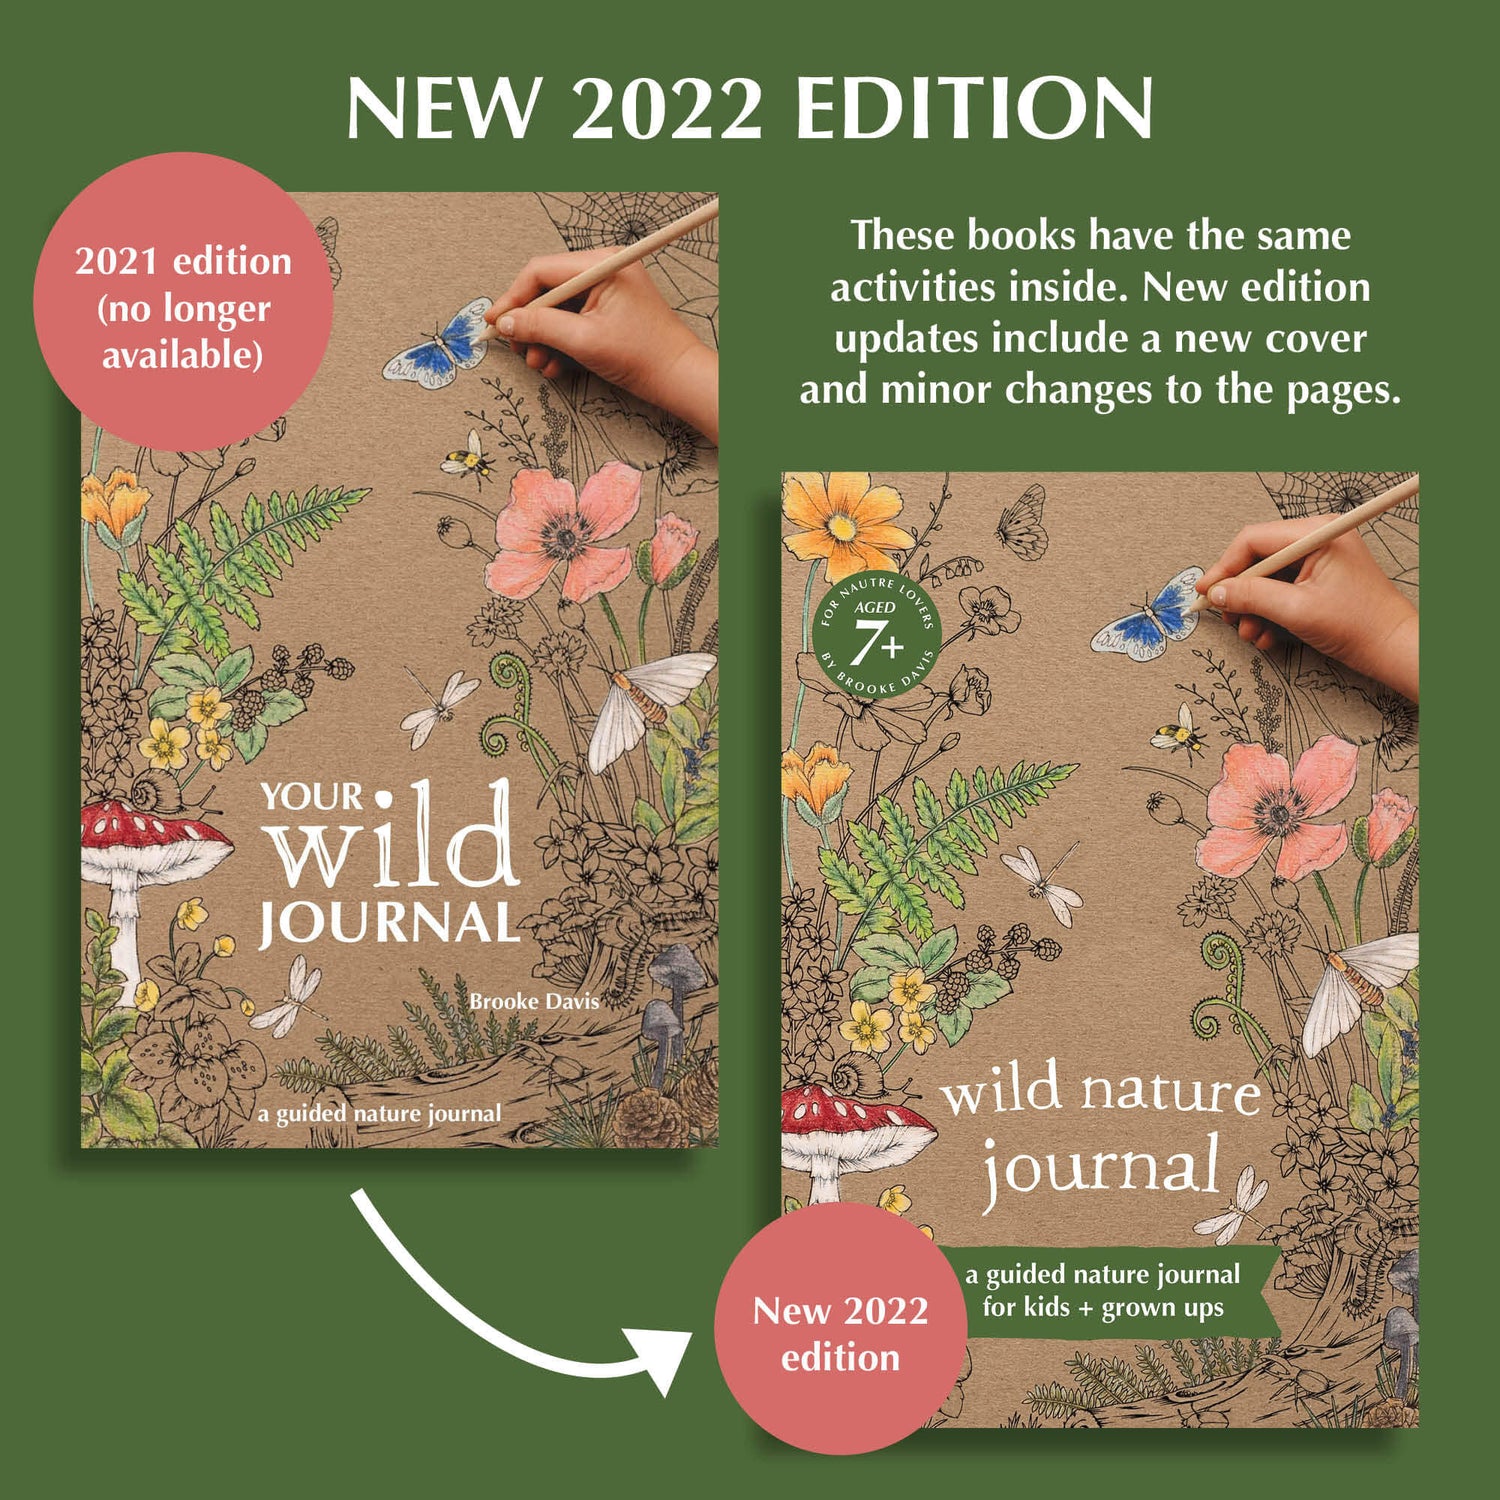 Editions of Wild Nature Journal, a guided nature journal for kids and grown ups is made in Australia by Your Wild Books.